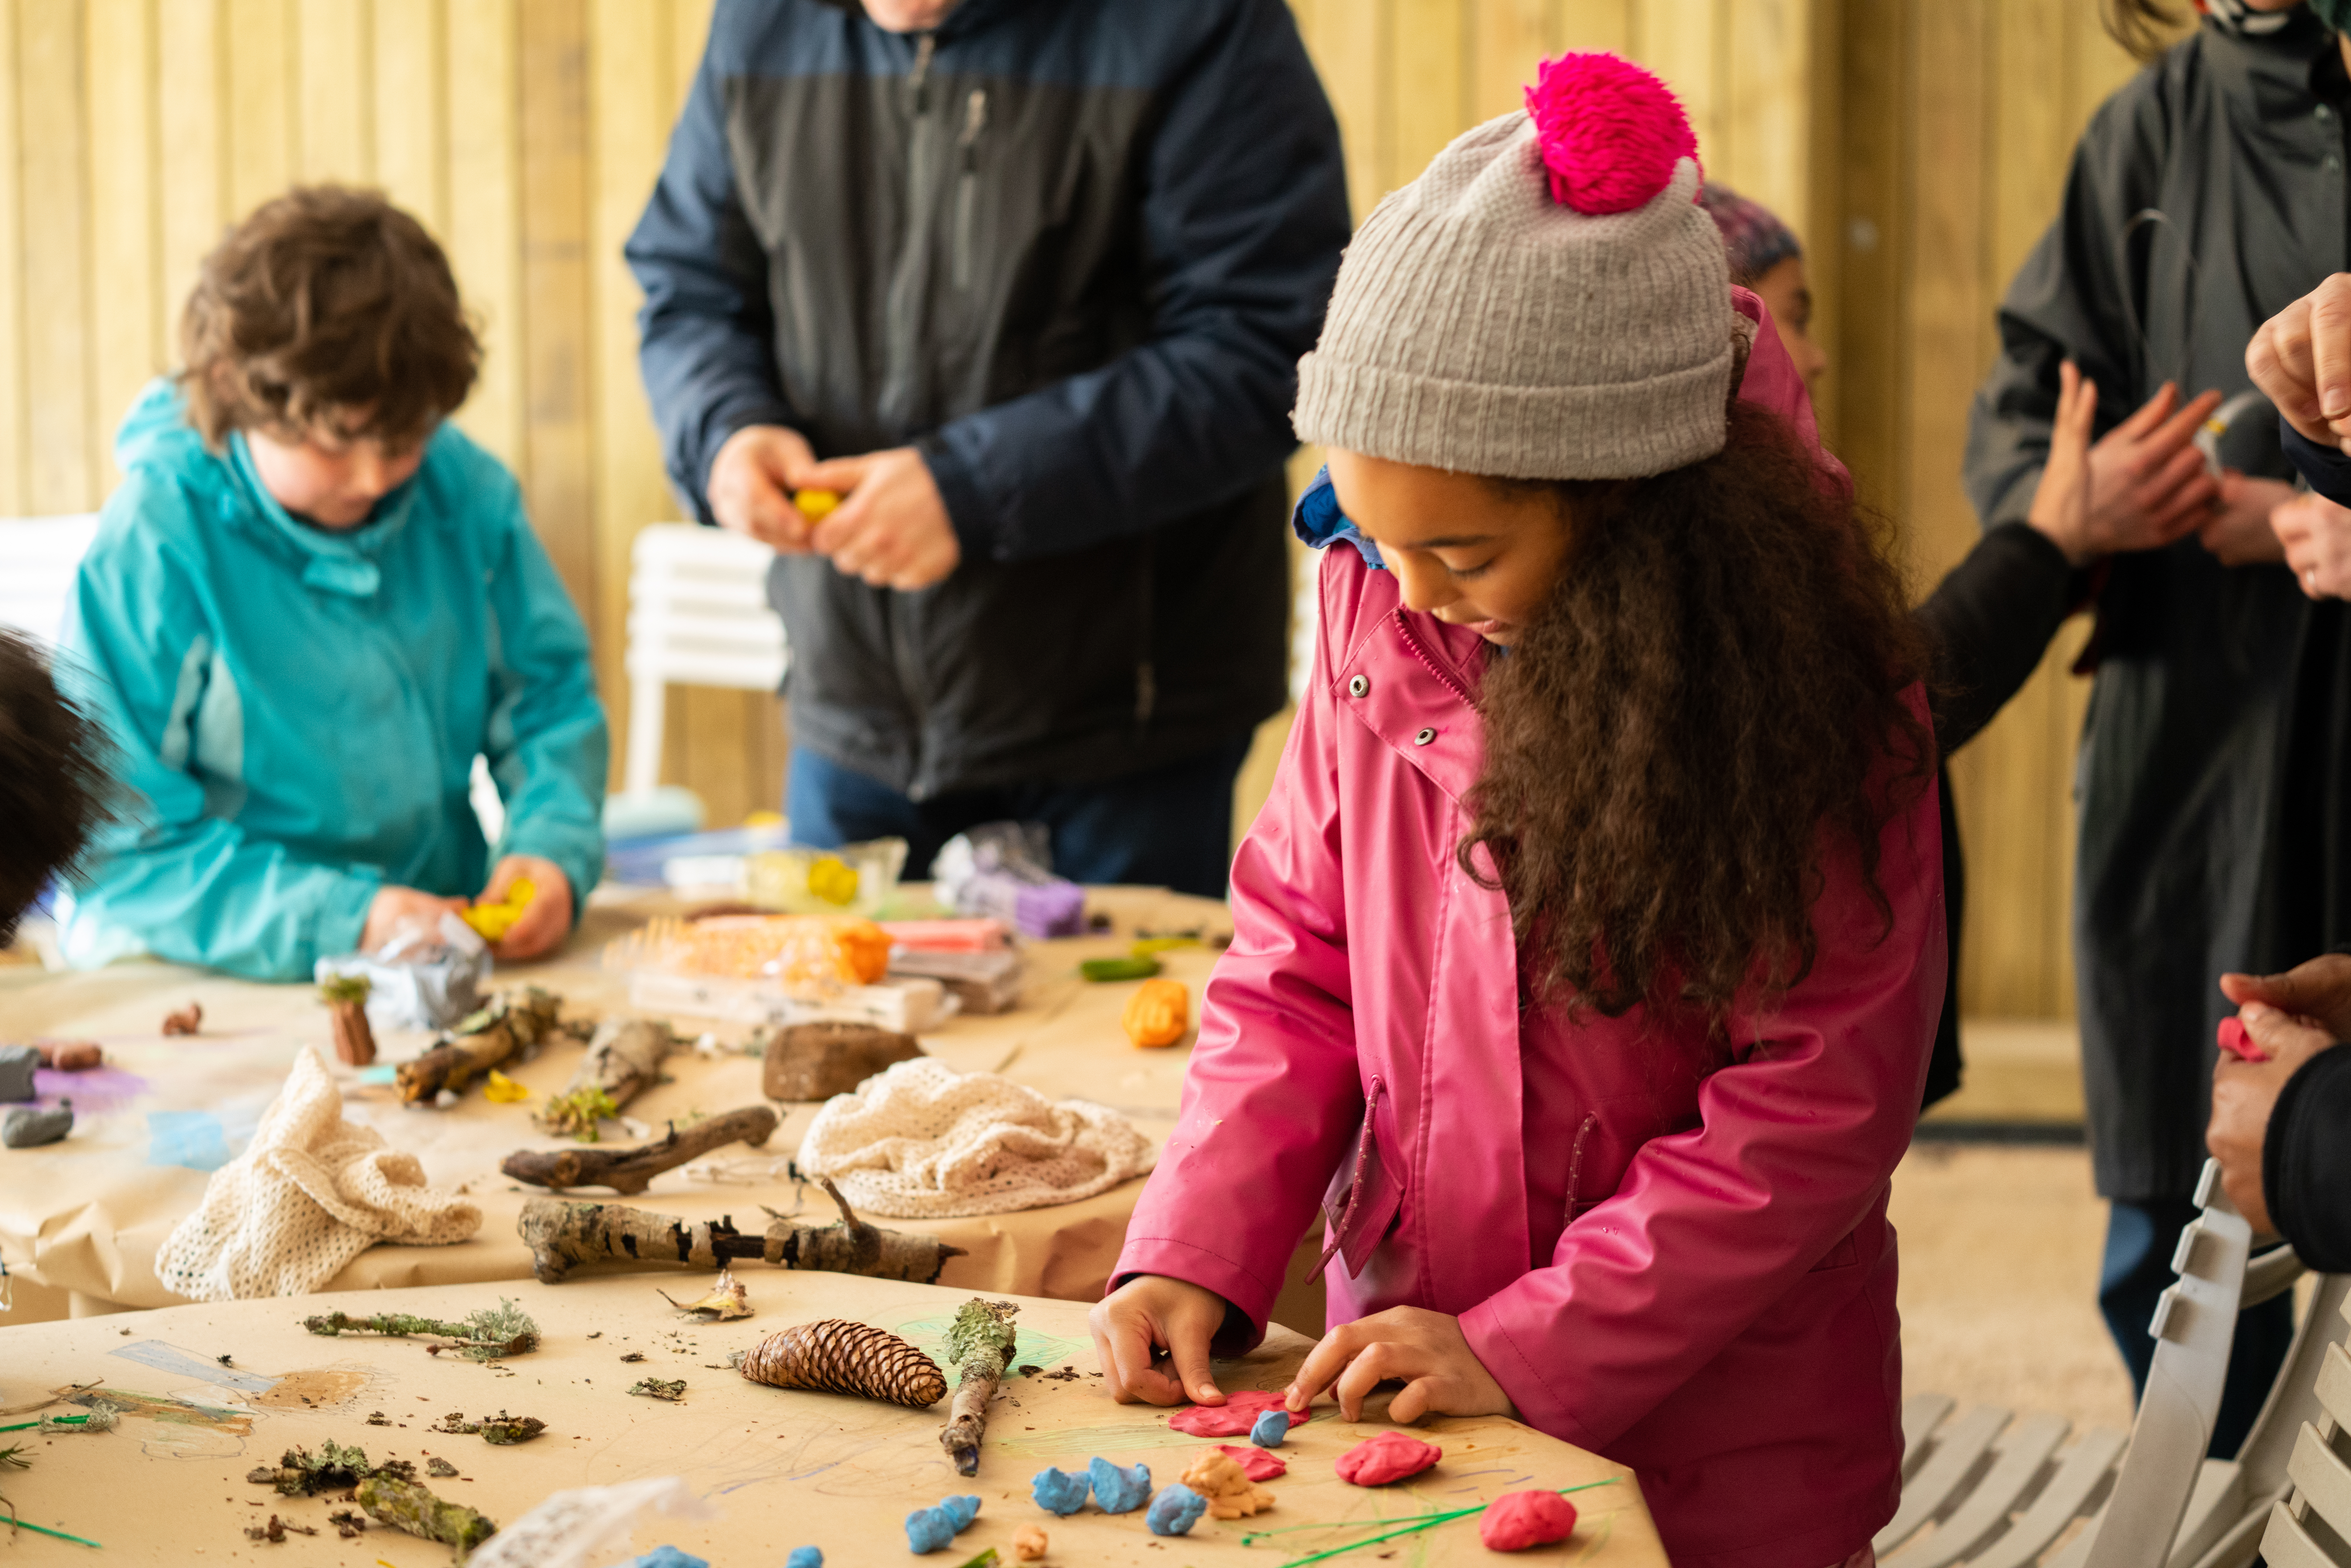 photograph of a child in a pink jacket and hat looking downwards whilst working on plasticine on a table, with other children, in a covered area outdoors.